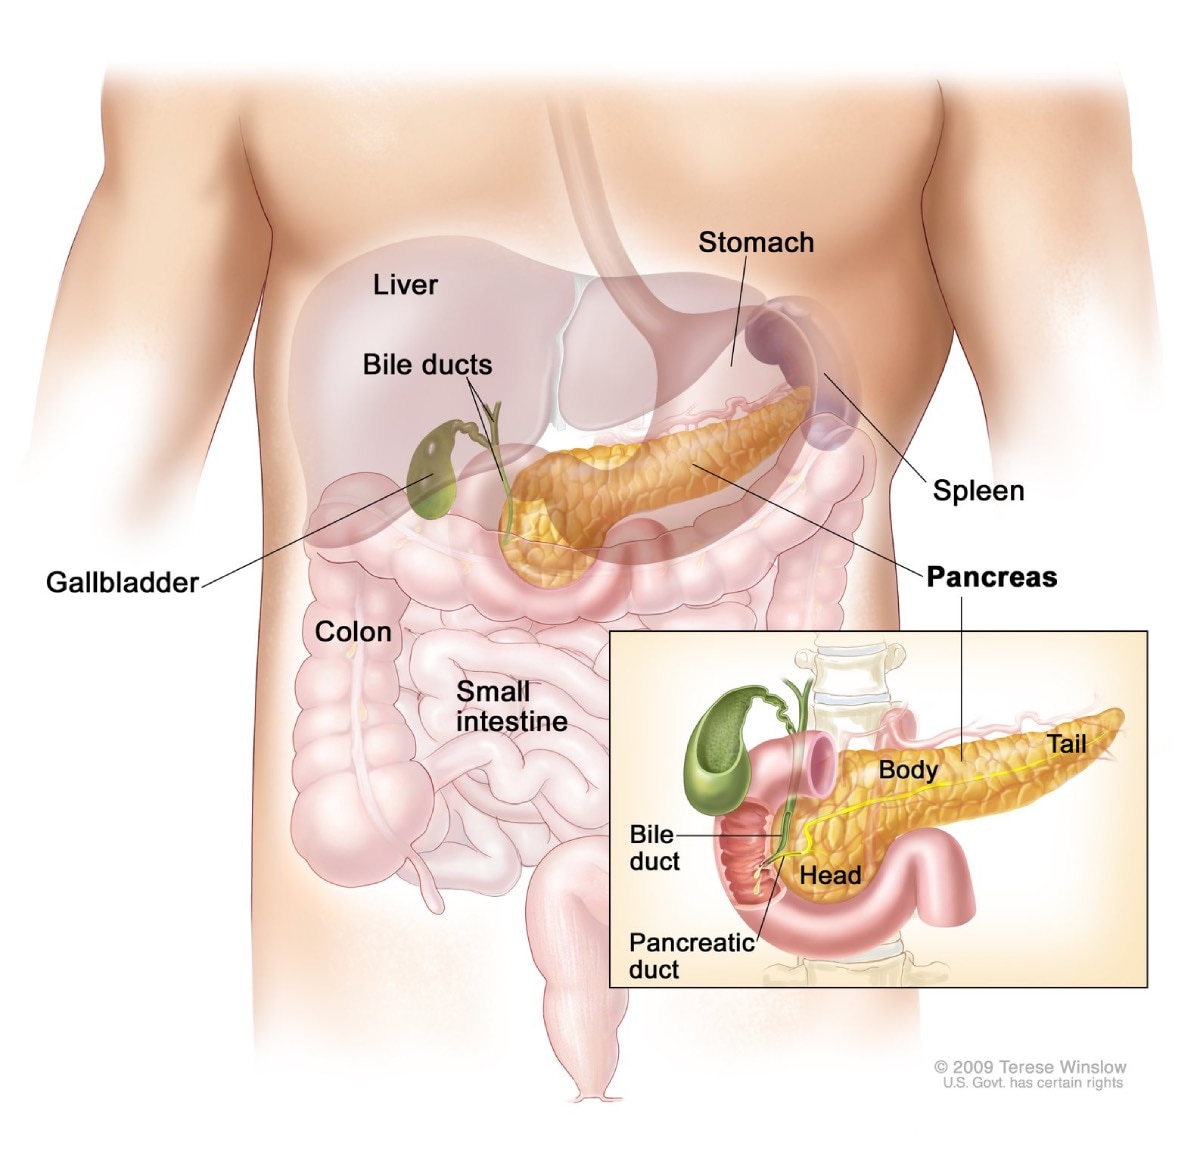 Illustration showing the size and location of the pancreas in the body. An inset provides a closer view of the pancreas, showing the duct that carries digestive juice to the small intestine. Labels indicate the liver, stomach, bile ducts, gallbladder, spleen, colon, small intestine, pancreas, pancreatic duct, and the head, body, and tail of the pancreas.